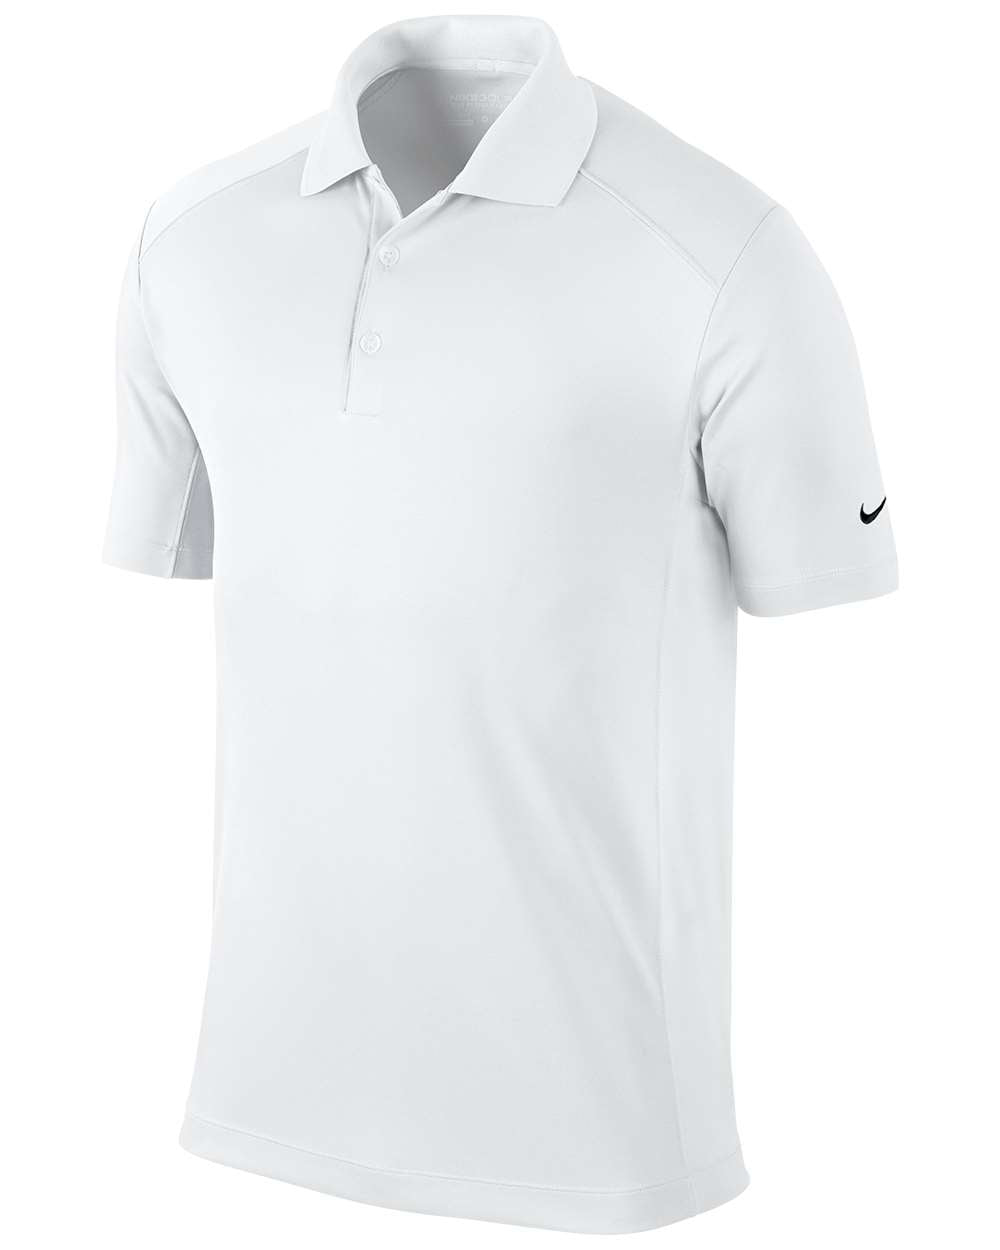 Nike Dry Fit Golf Shirt (Size XL Only)